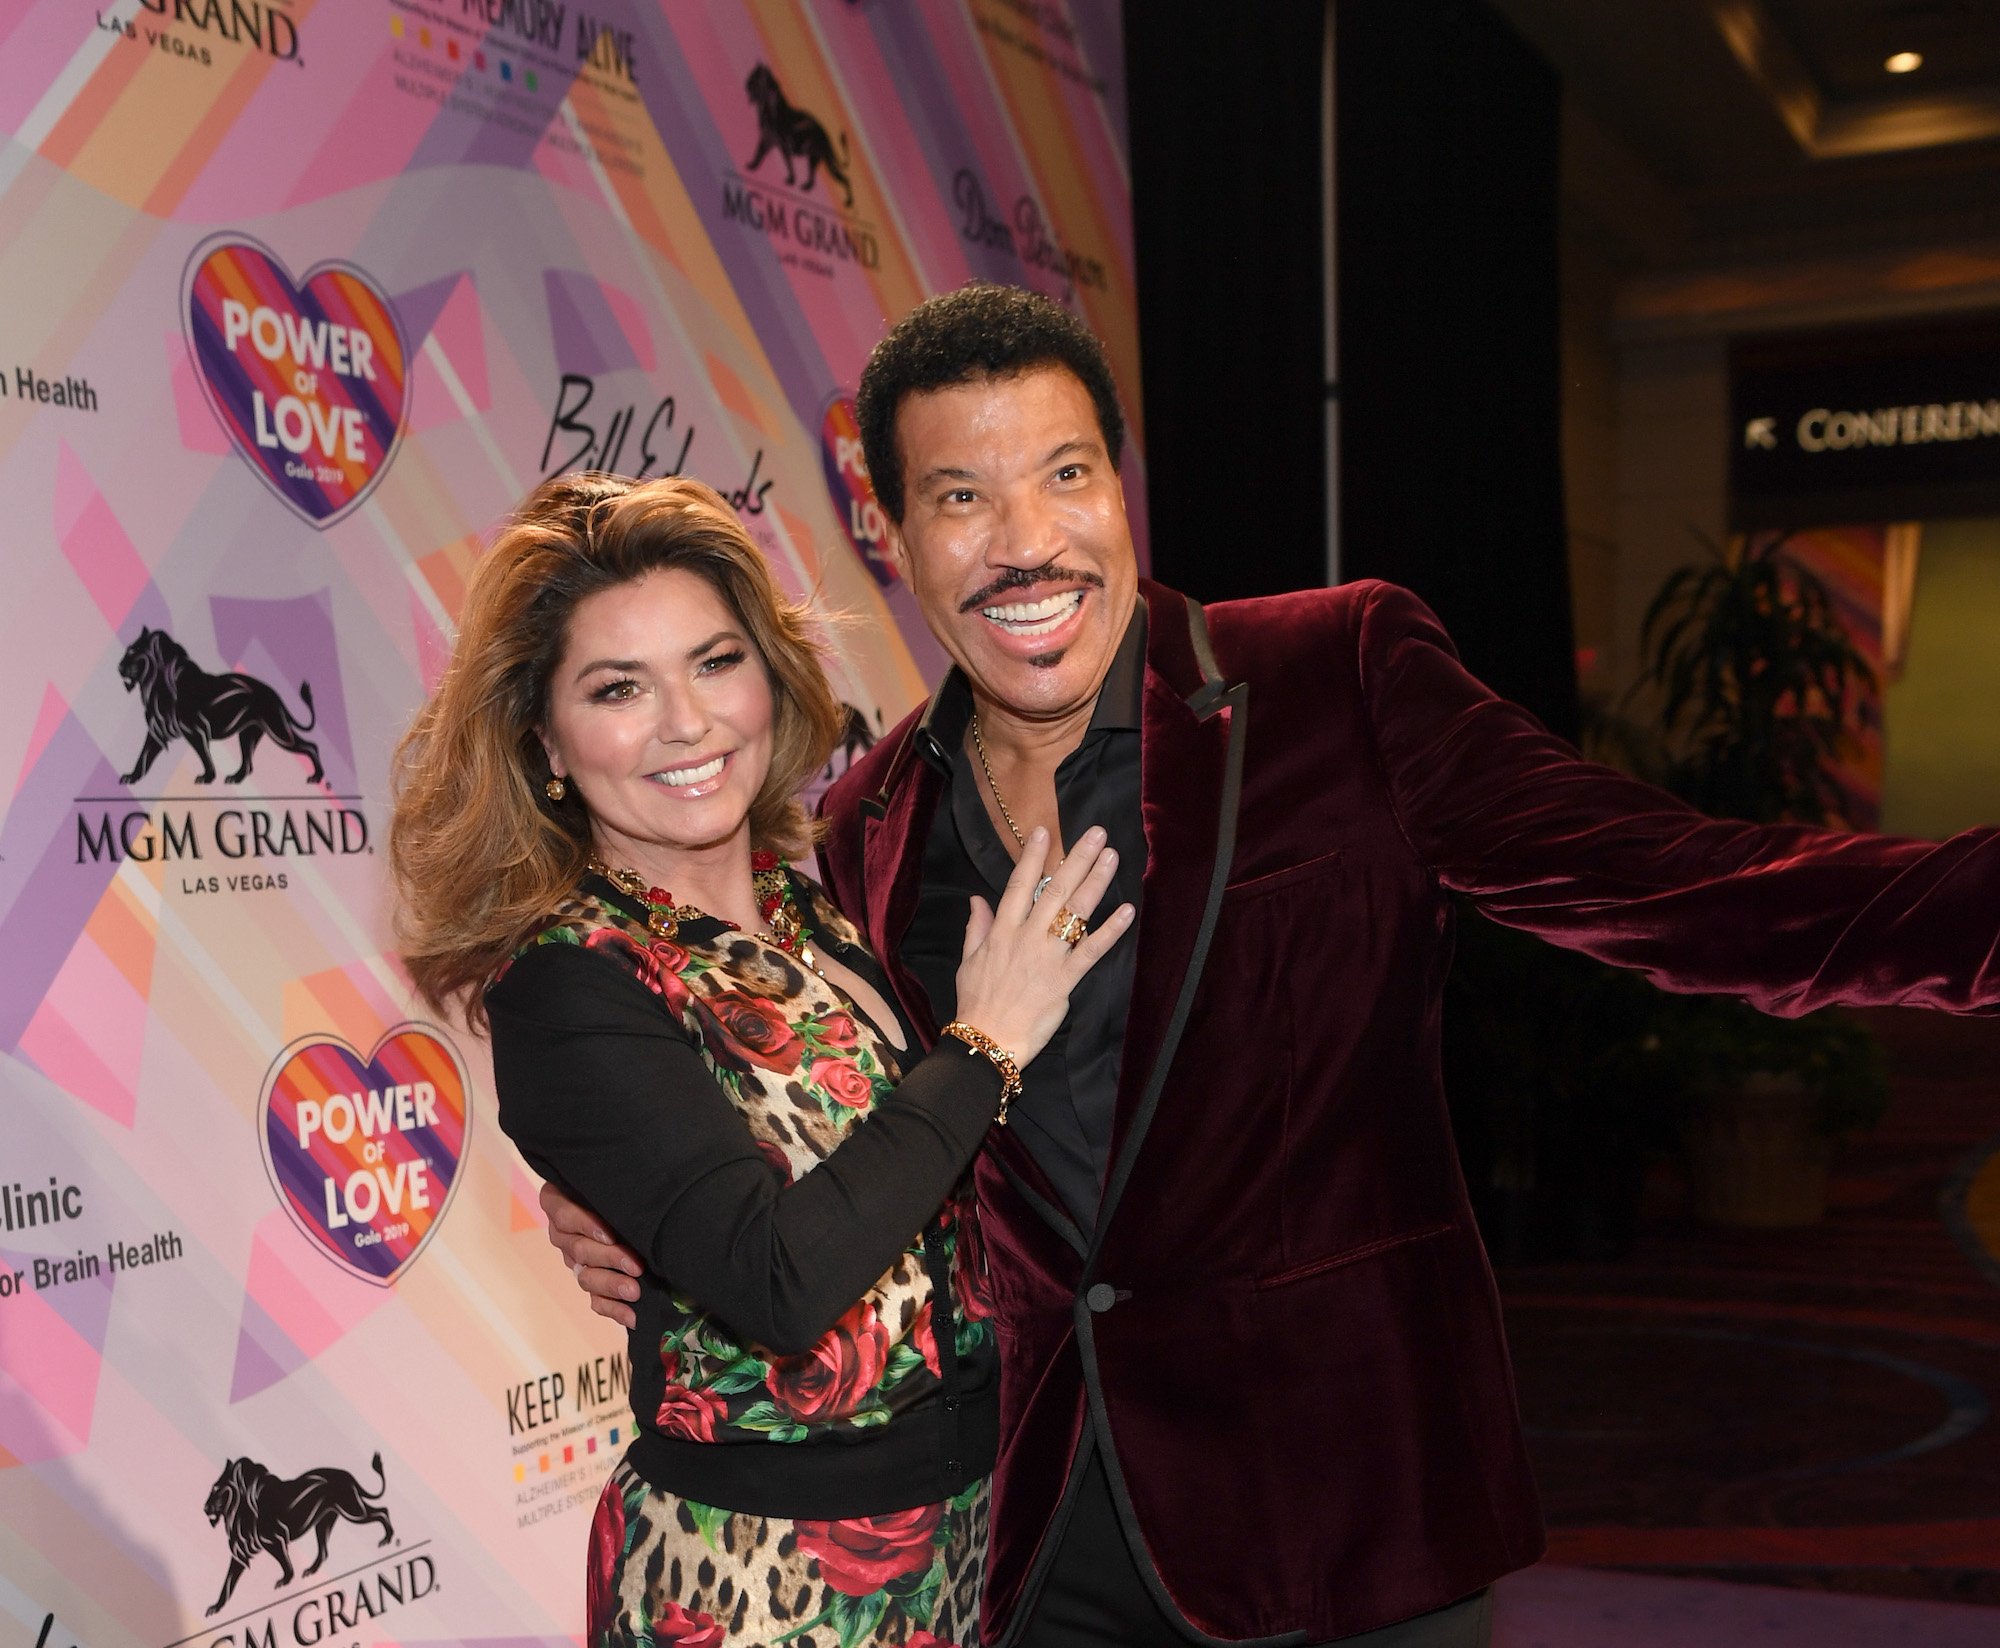 Shania Twain and Lionel Richie photographed together